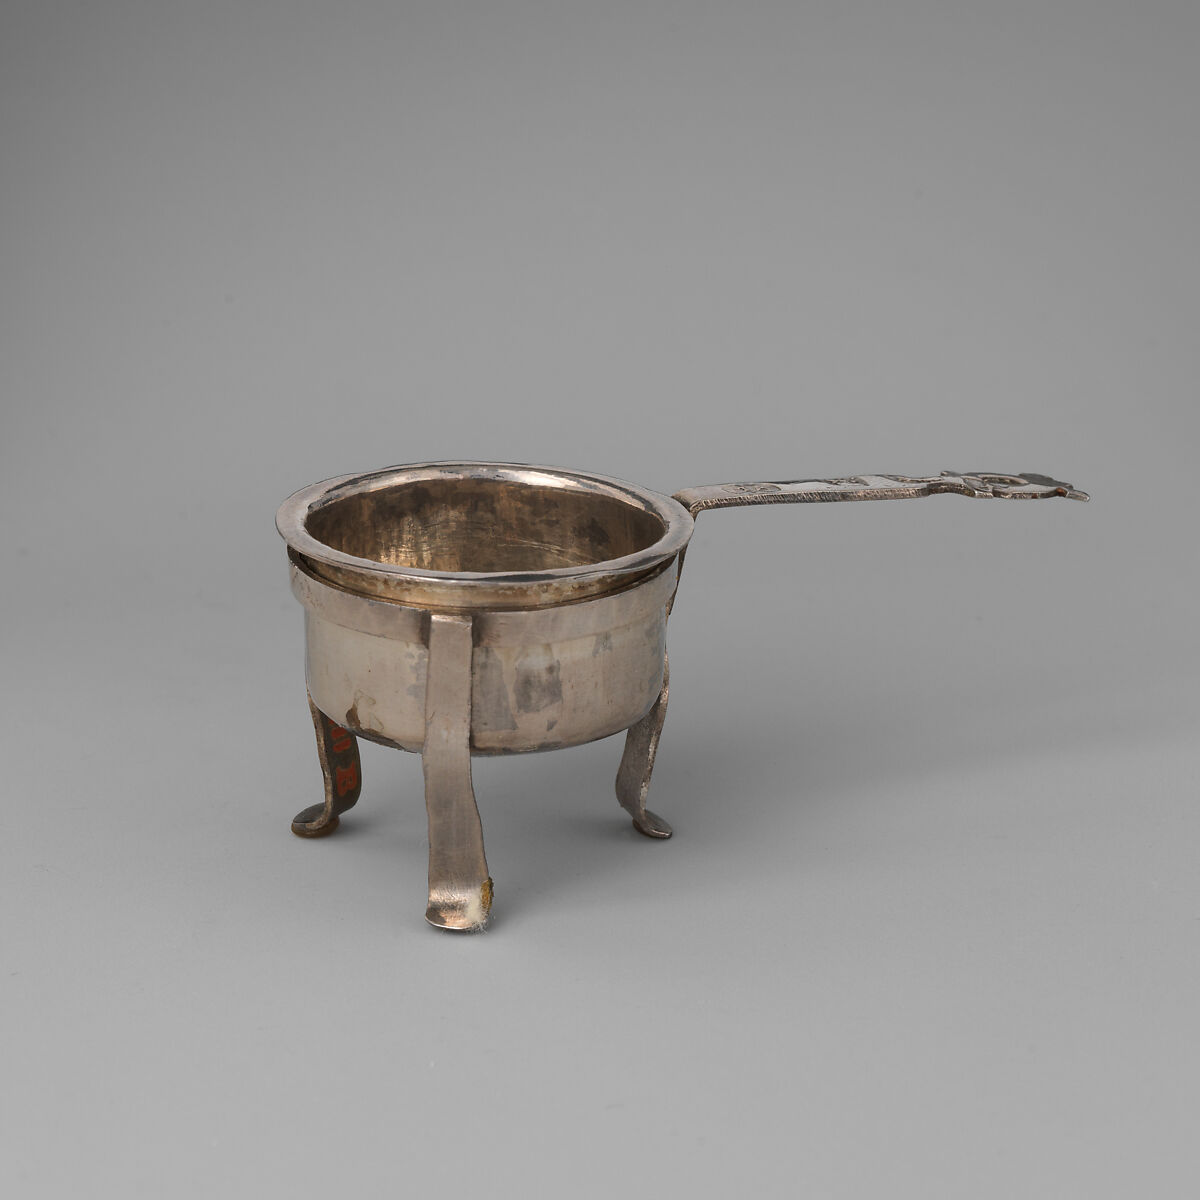 Miniature saucepan with stand, Possibly by George Manjoy (British, active 1685–ca. 1720), Silver, British, London 